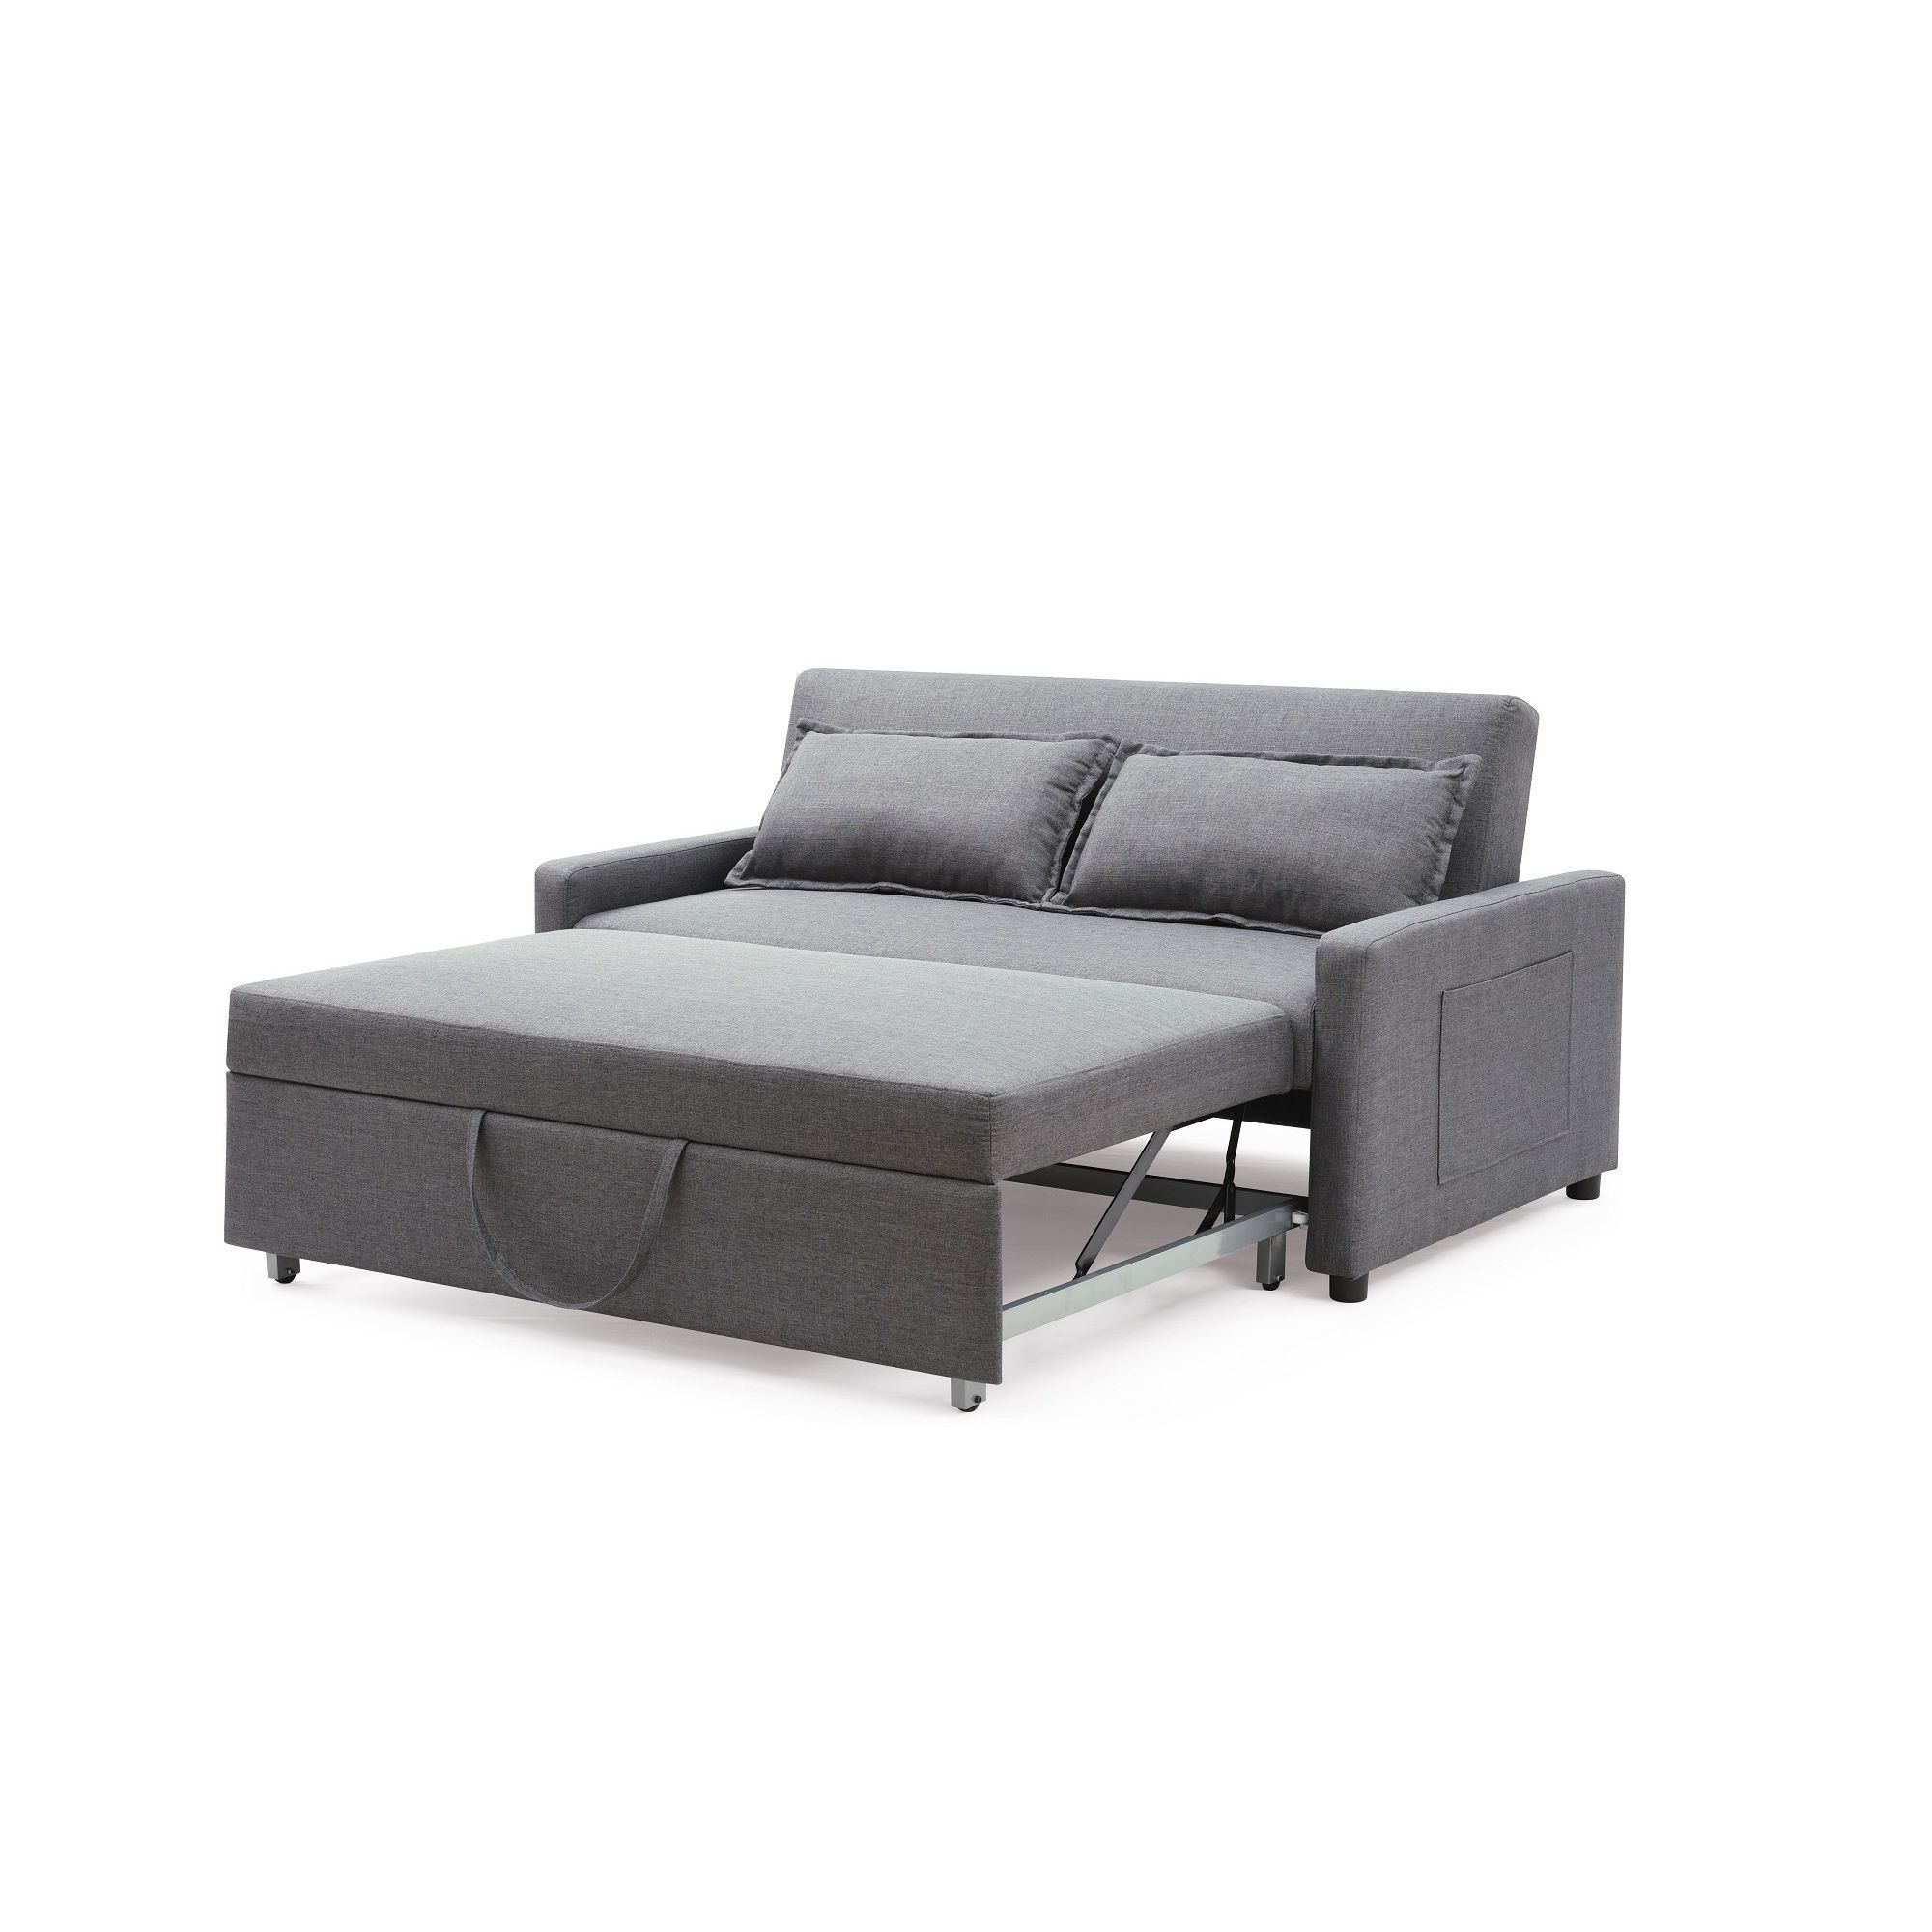 Newest Overstock: Online Shopping – Bedding, Furniture, Electronics Inside 2 In 1 Gray Pull Out Sofa Beds (View 7 of 15)